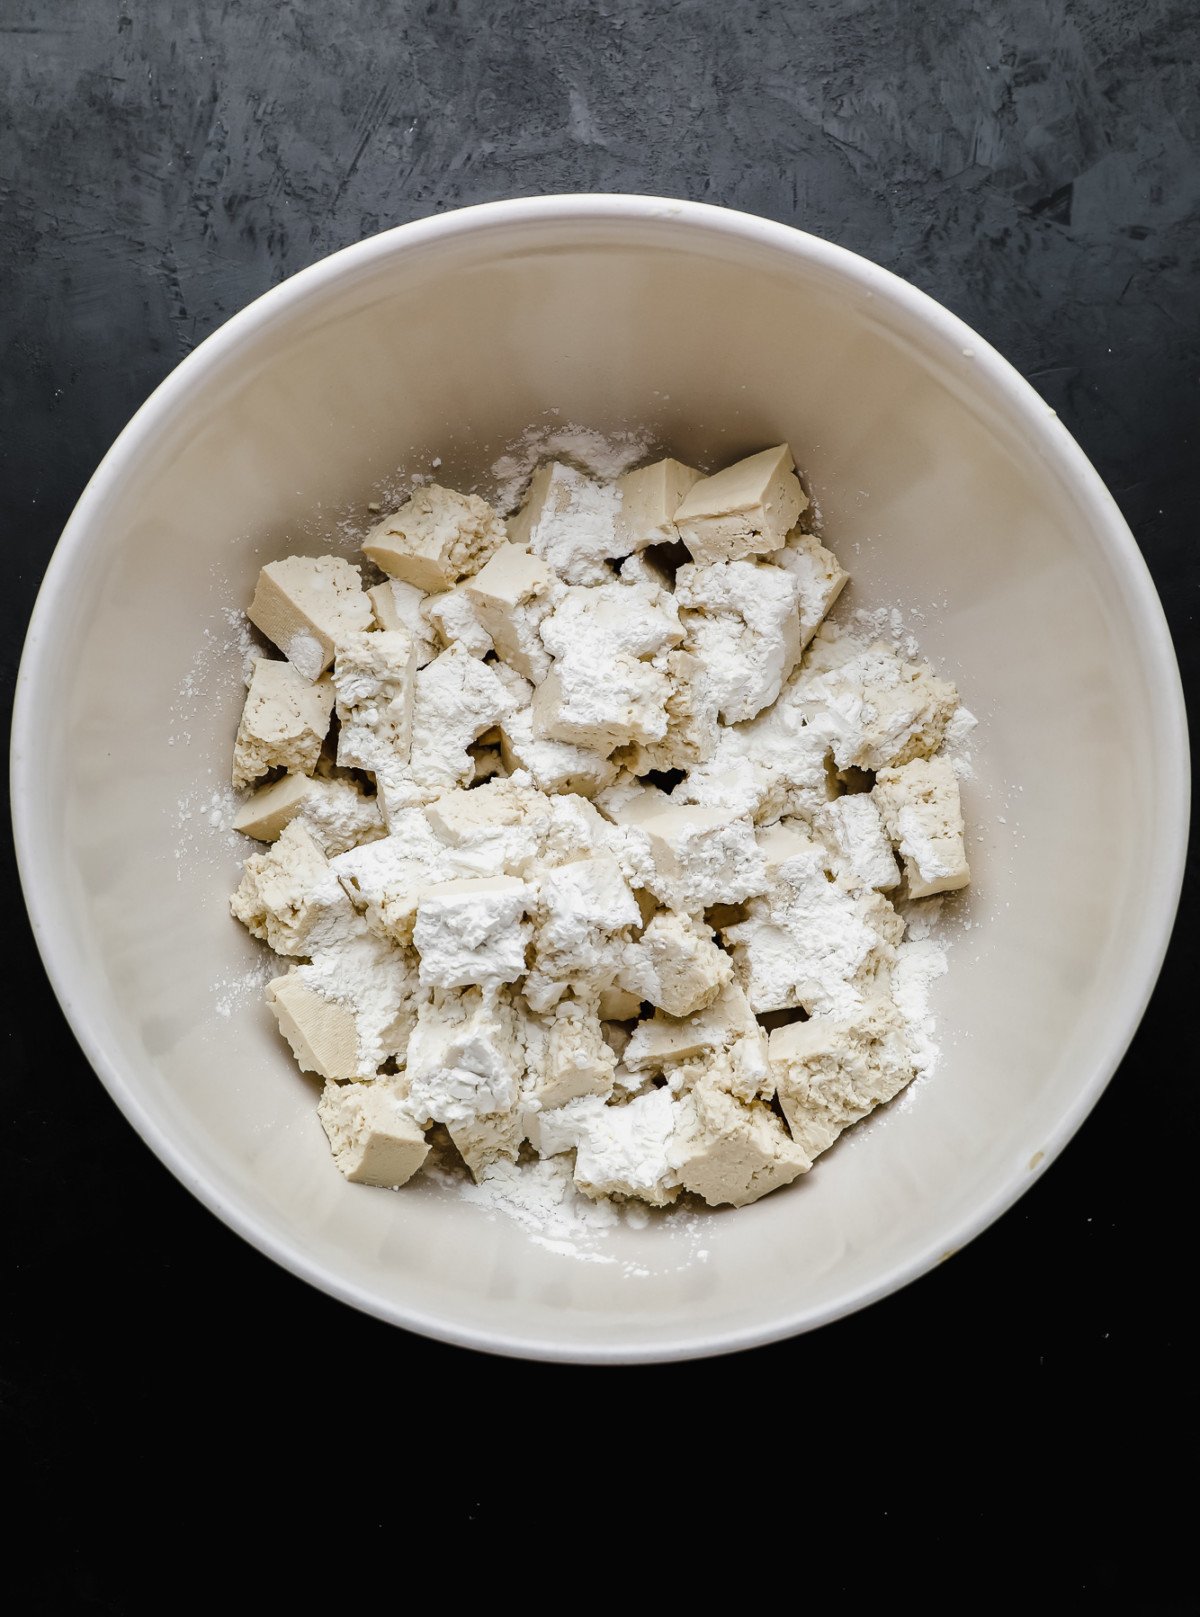 Tofu pieces covered in cornstarch in a large white bowl.